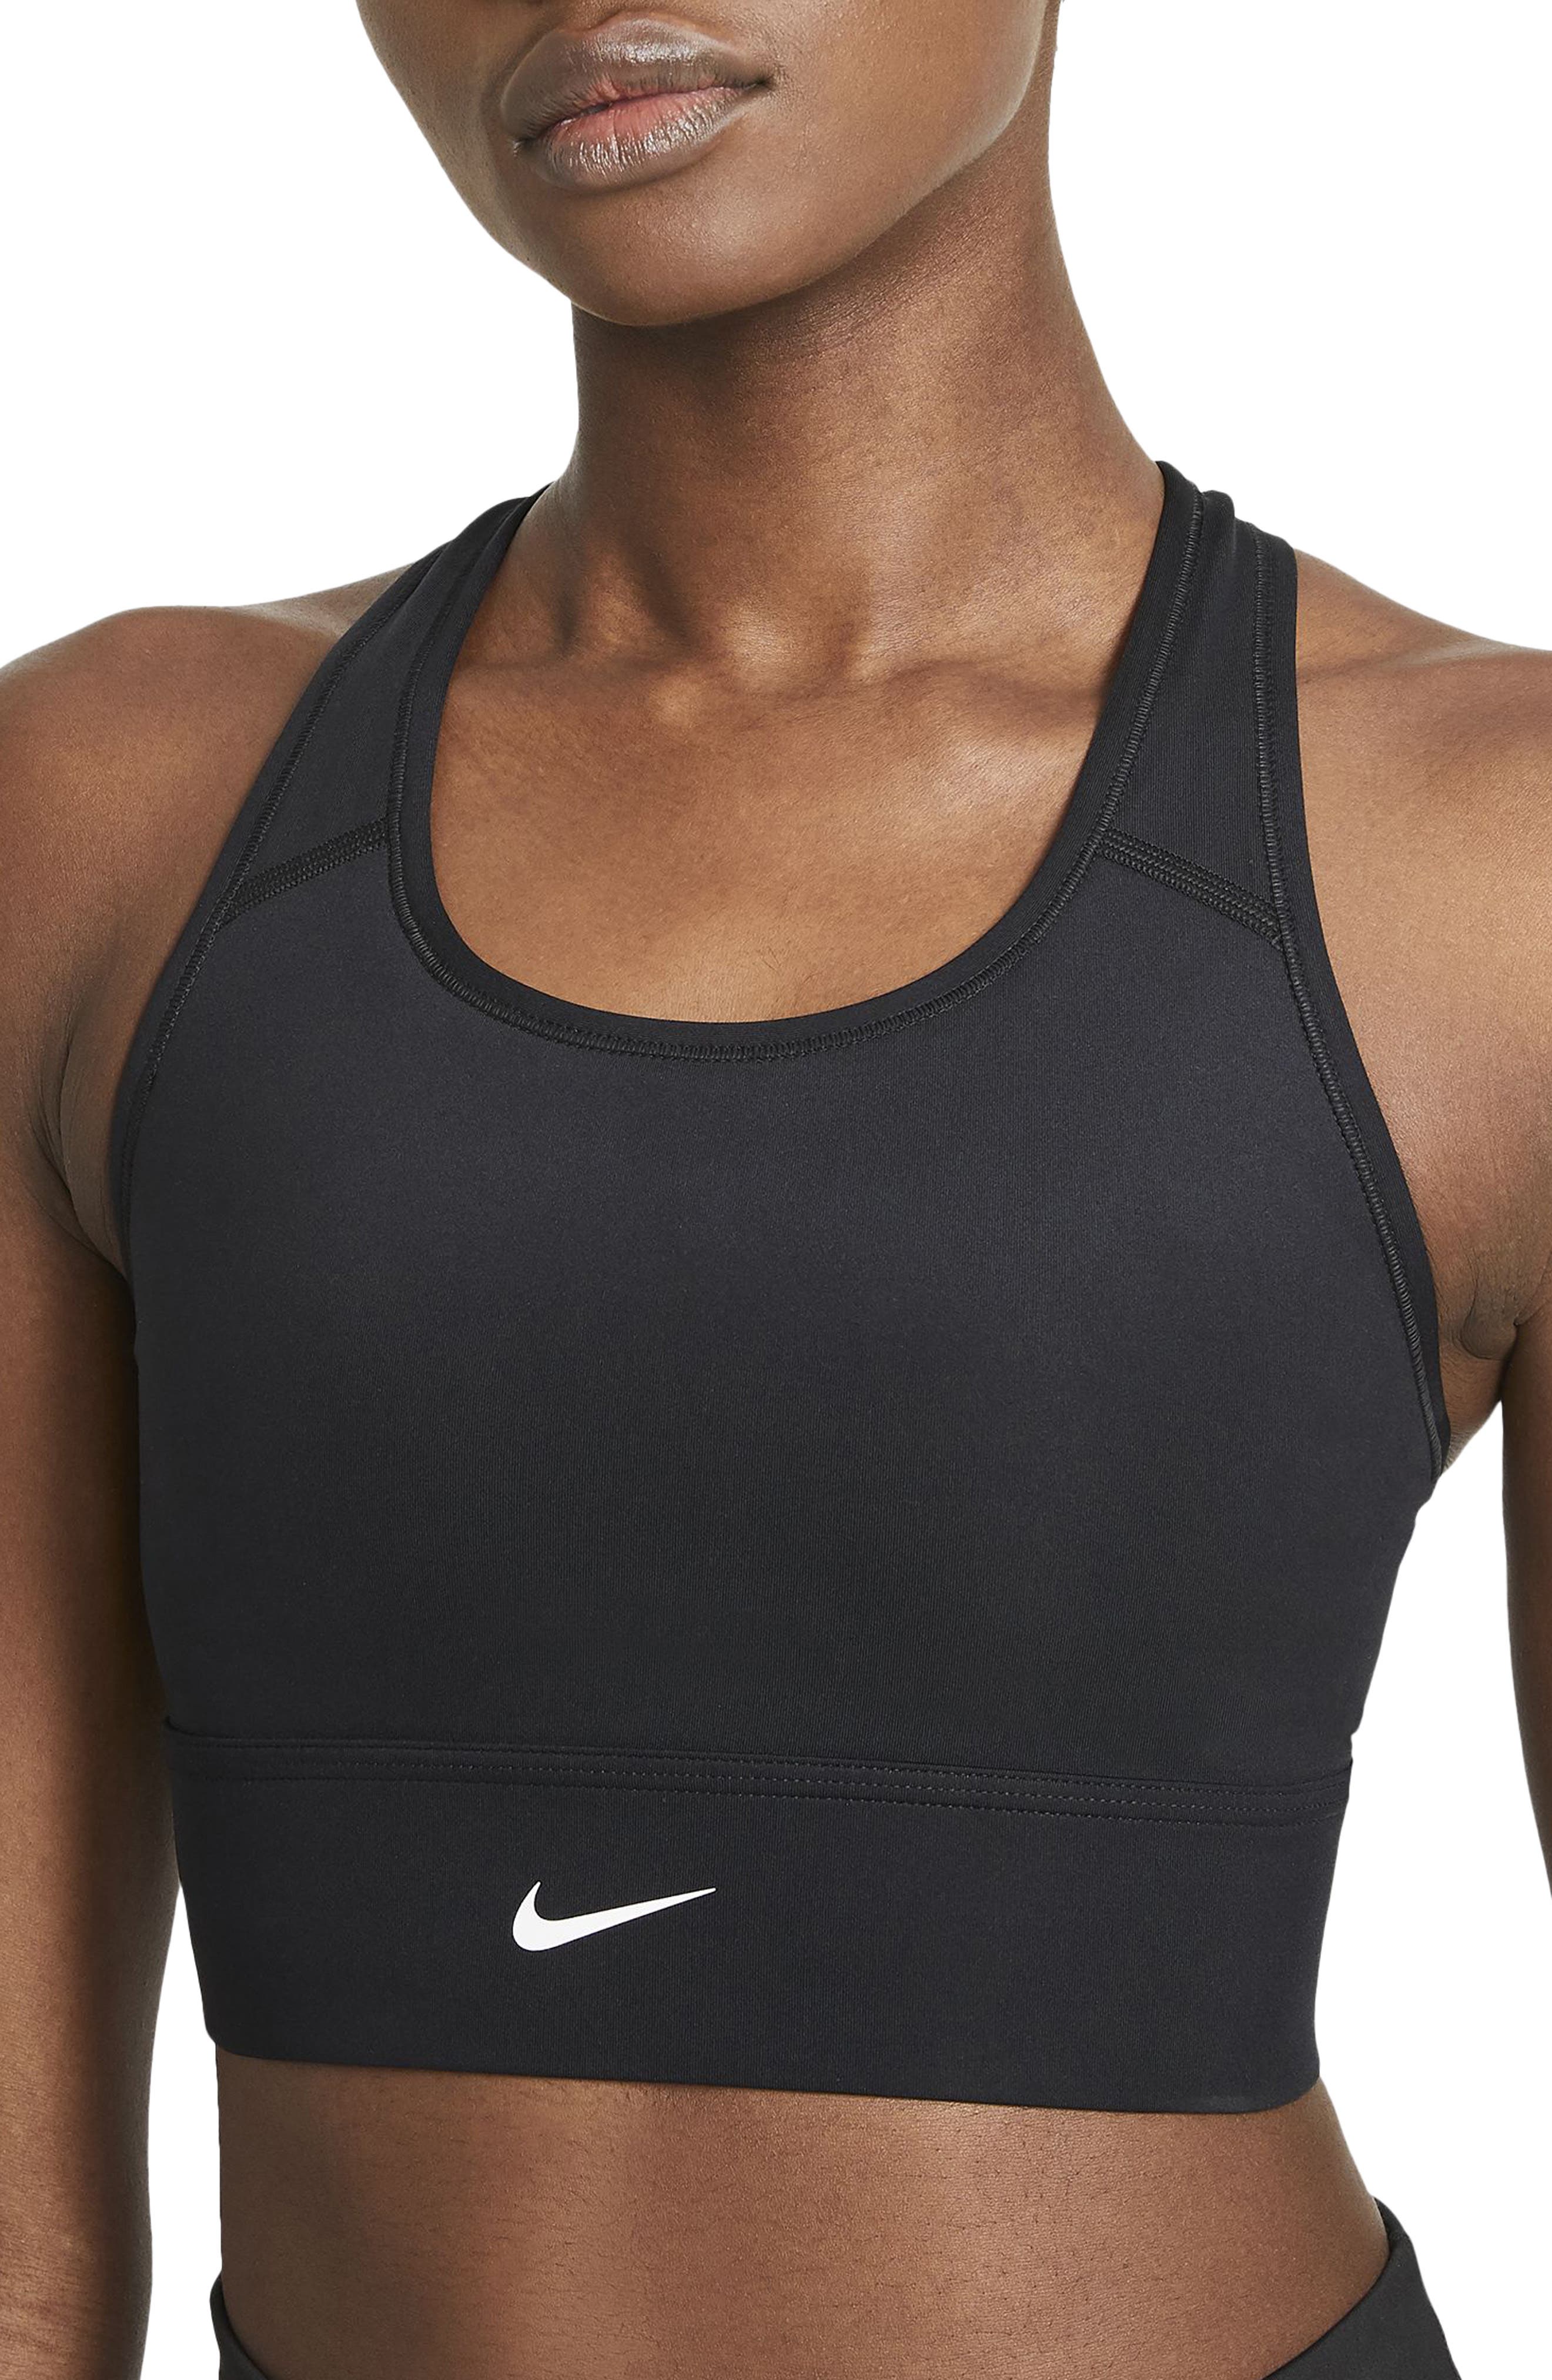 The 10 Best Sports Bras for Teens - Recommended Sports Bras for Teens